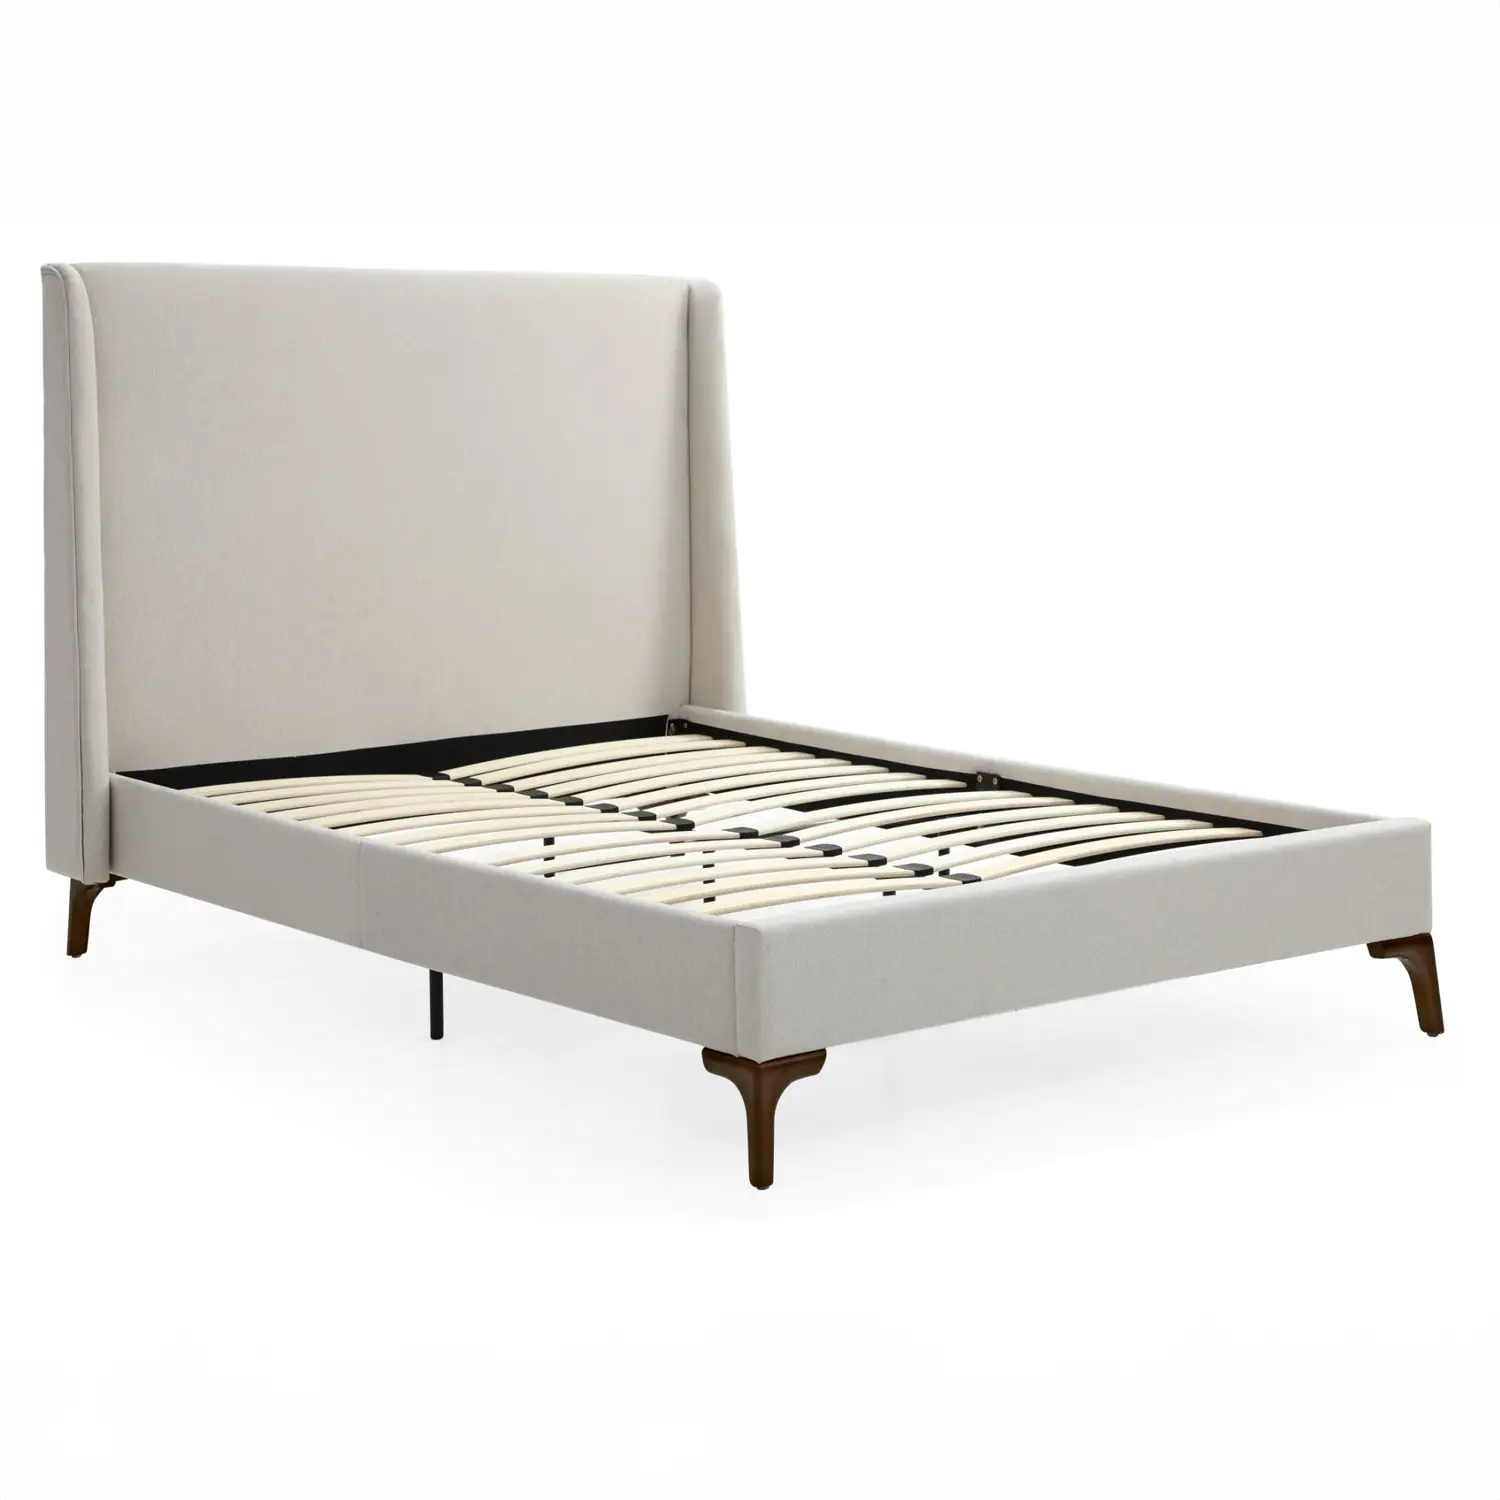 Opulent - Upholstered Bed with Walnut Legs